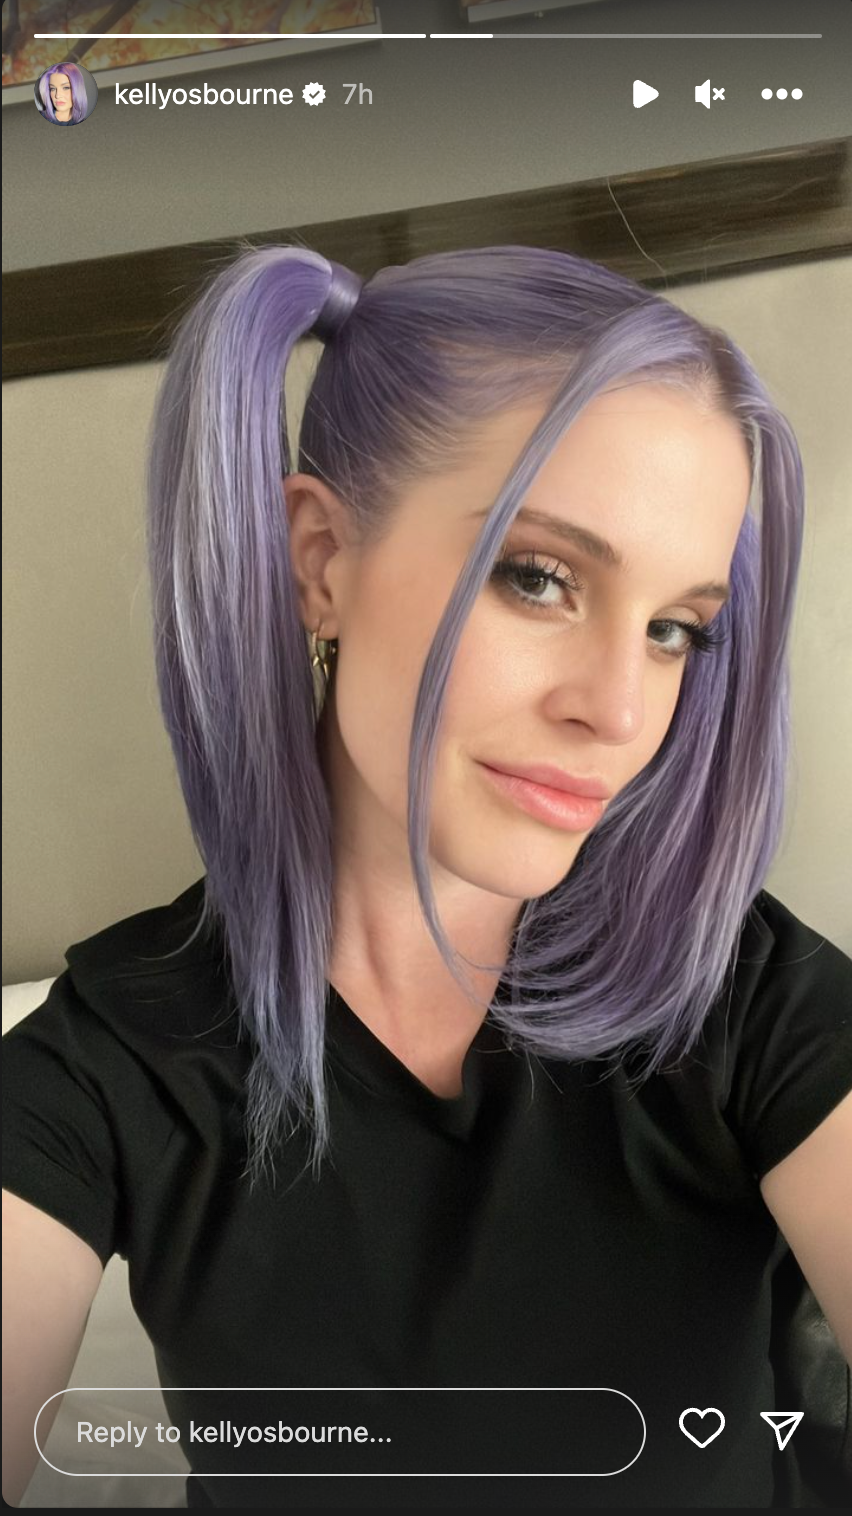 Kelly Osbourne looks unrecognisable and in new photos